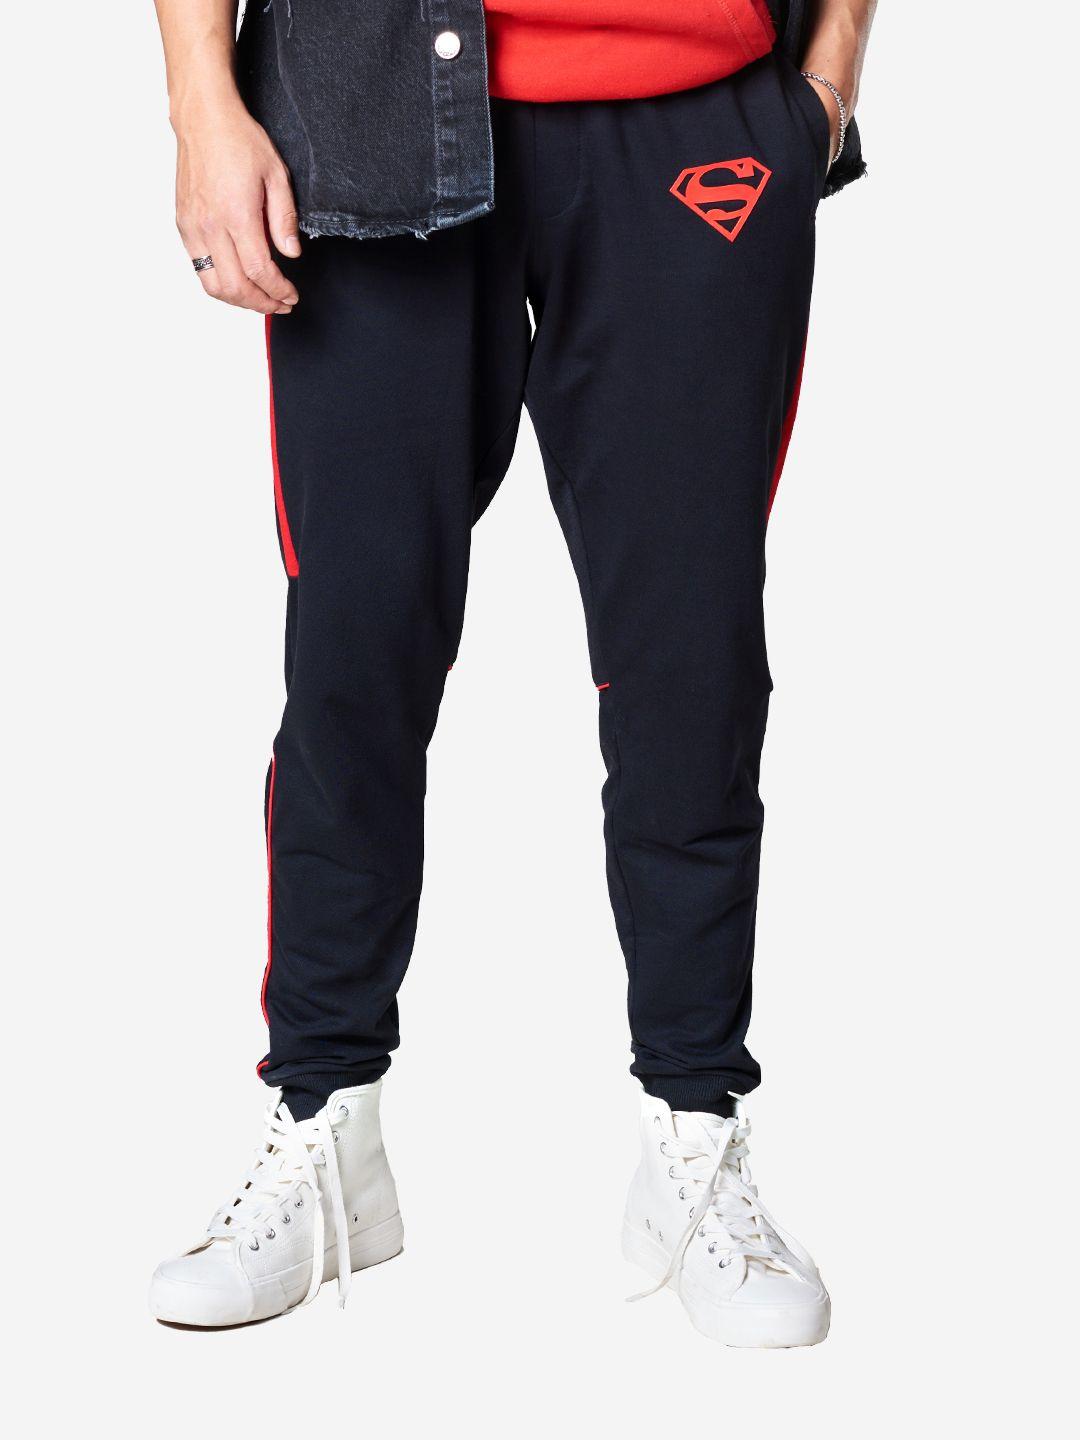 the souled store black & red superman side striped lounge pants